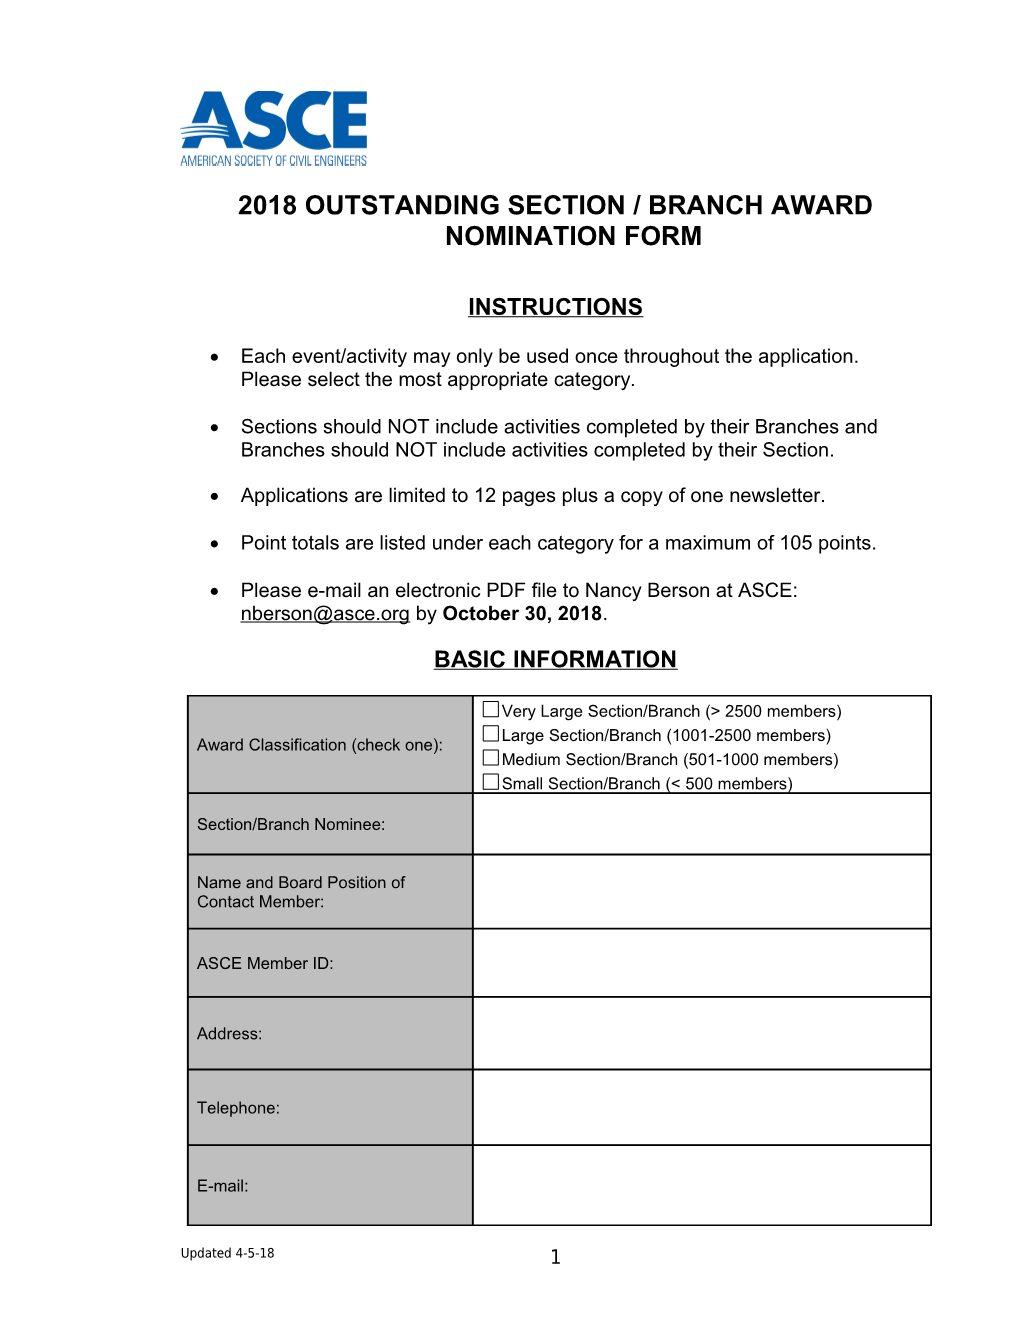 2018 Outstanding Section / Branch Award Nomination Form